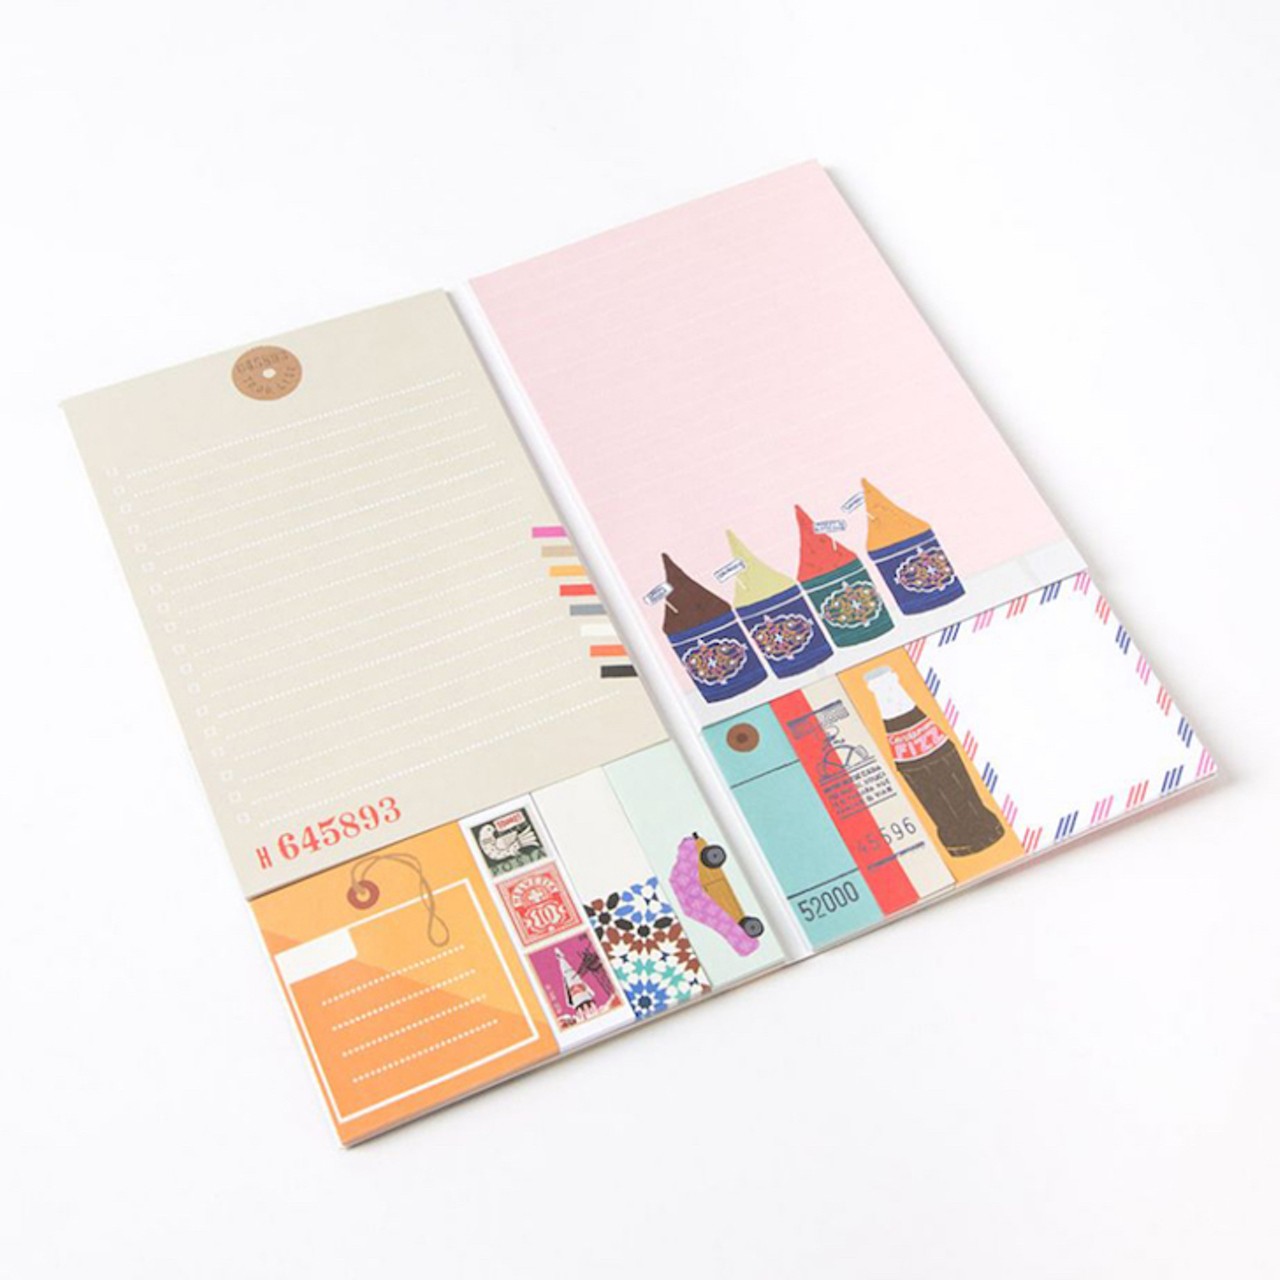 En Route Sticky Notes & To-Do Lists, $12.95 For the wandering-traveler type of stationery lover, this sticky-note pack will help you gallivant through the world with a prepared set of listicles. The hook closure makes it the perfect spot to keep an airplane ticket.